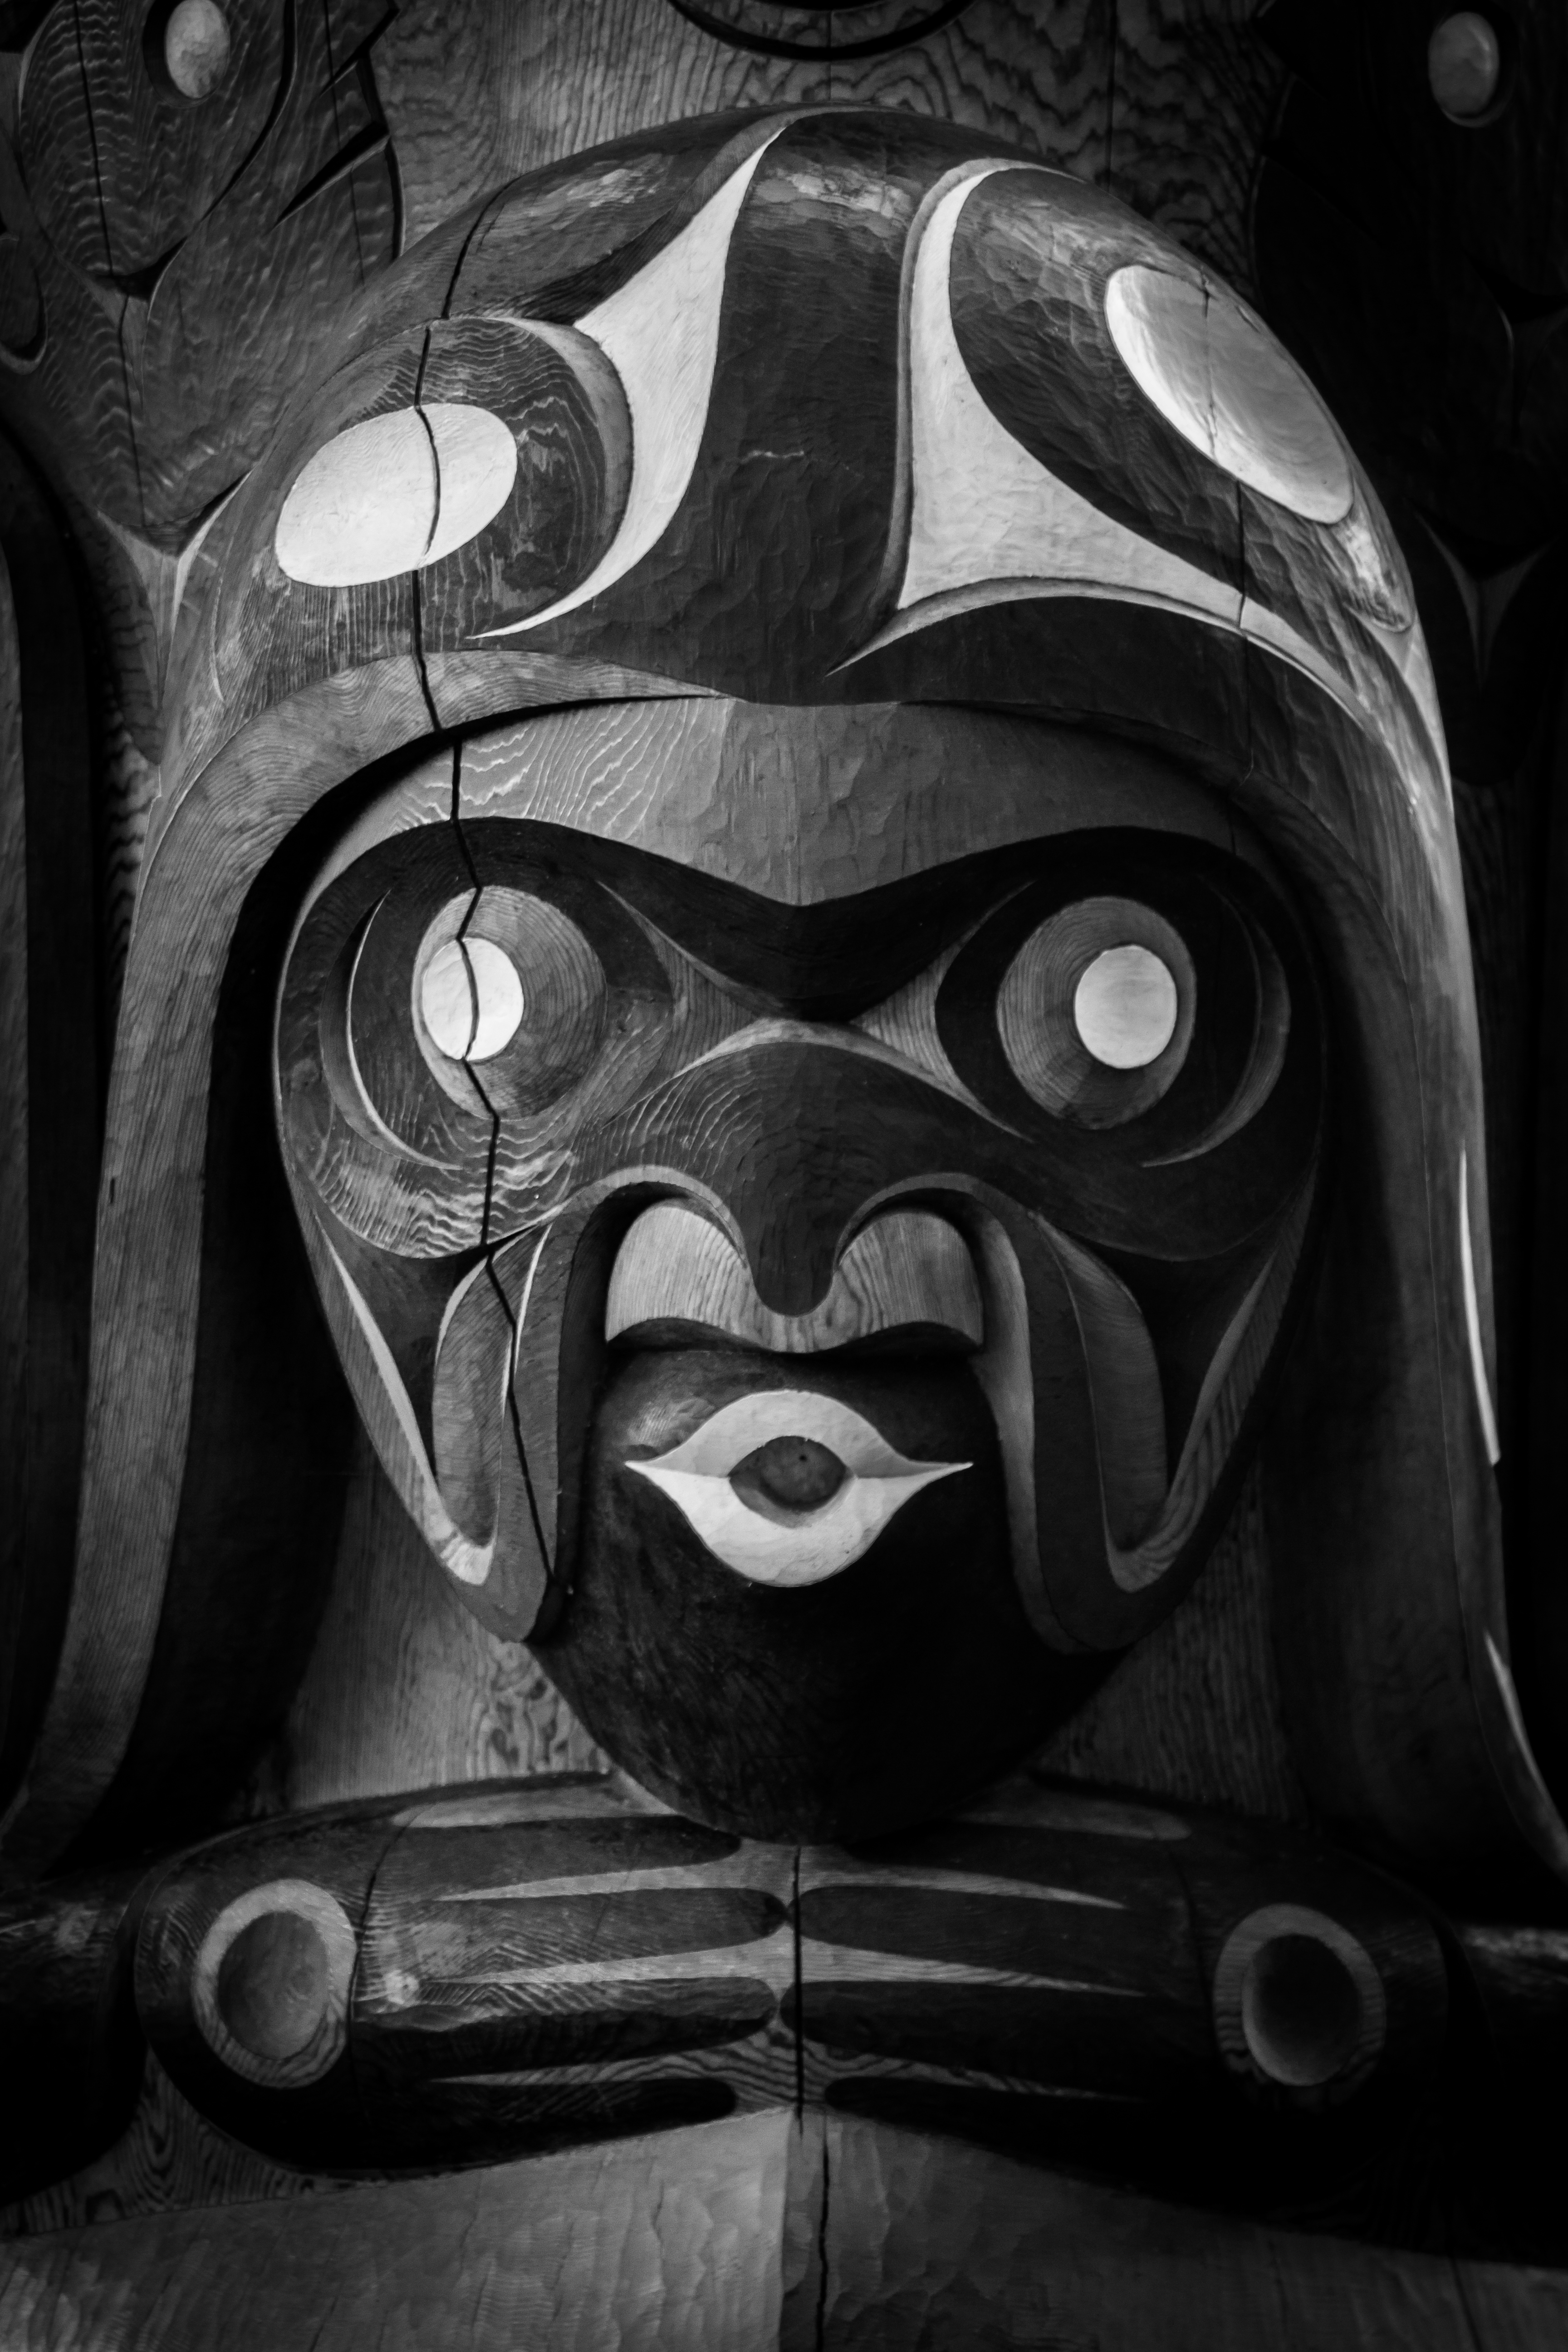 Sasquatch, or sasquets, who watches over the village. Carved into the YOS totem at the Trans Canada Trail.